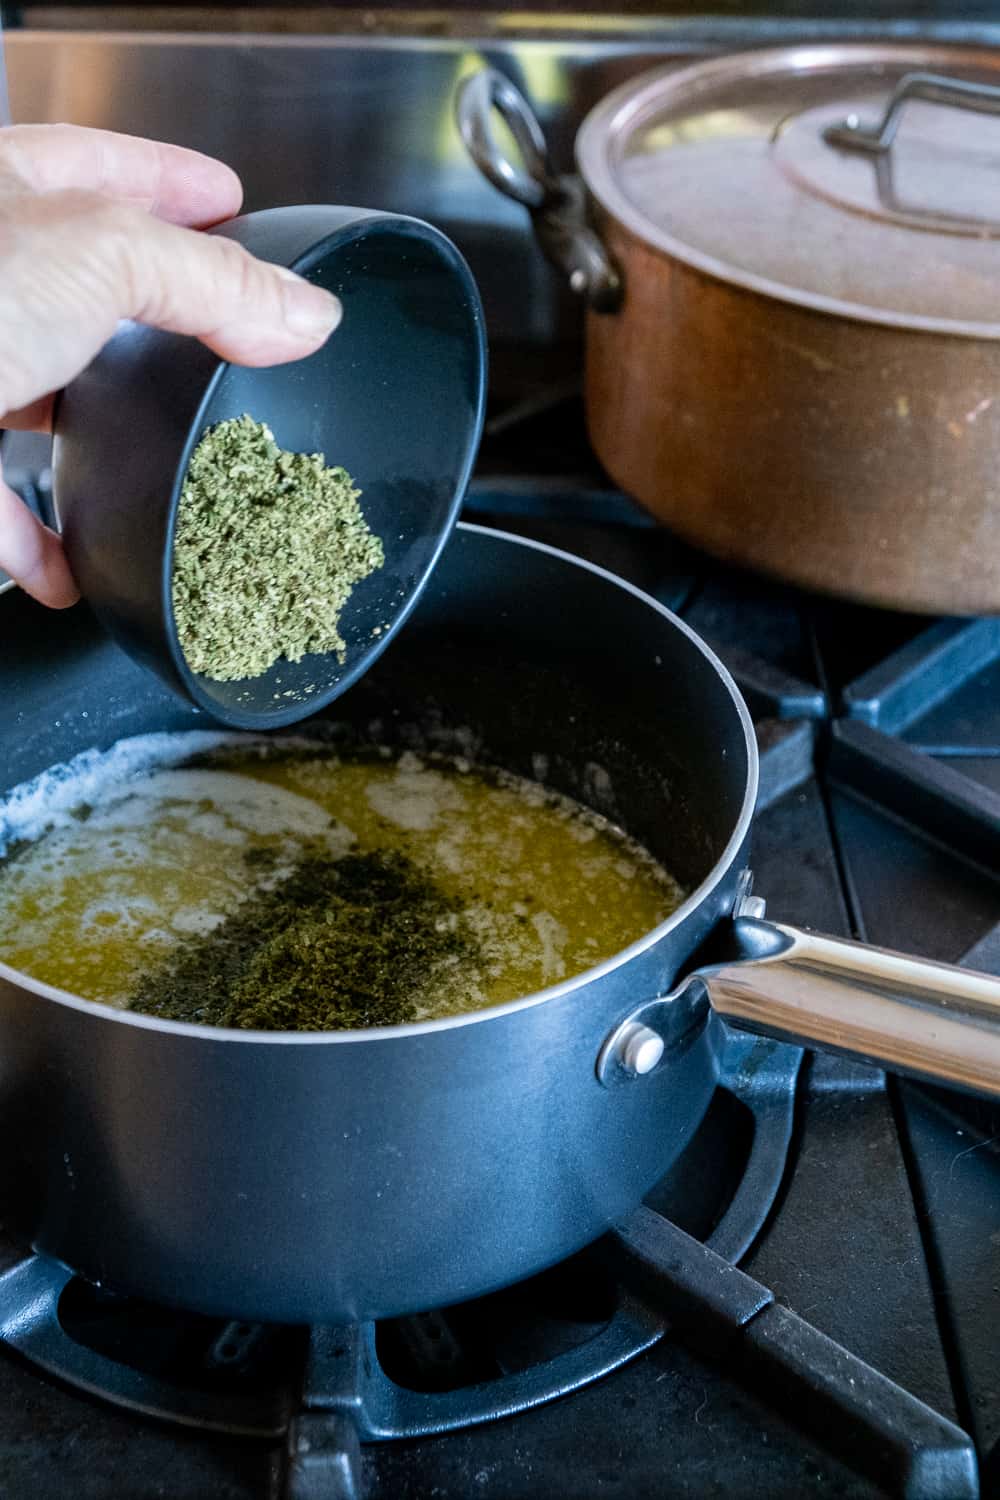 Decarbed, ground cannabis being dropped from black bowl into pot of butter and water.